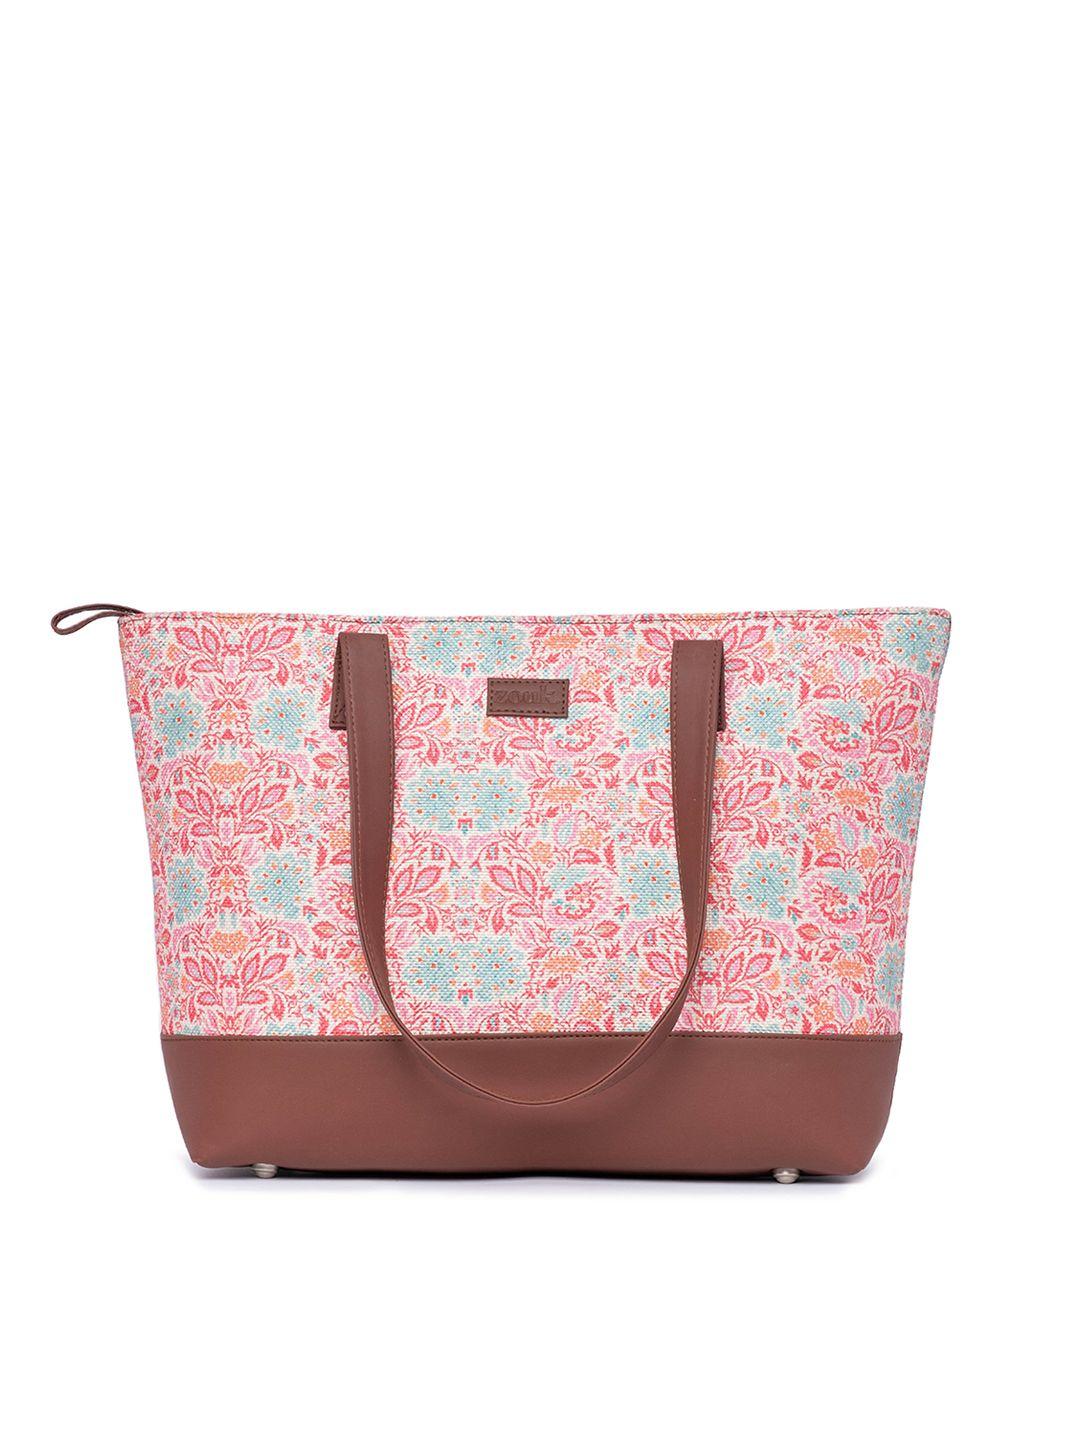 zouk women floral printed structured tote bag